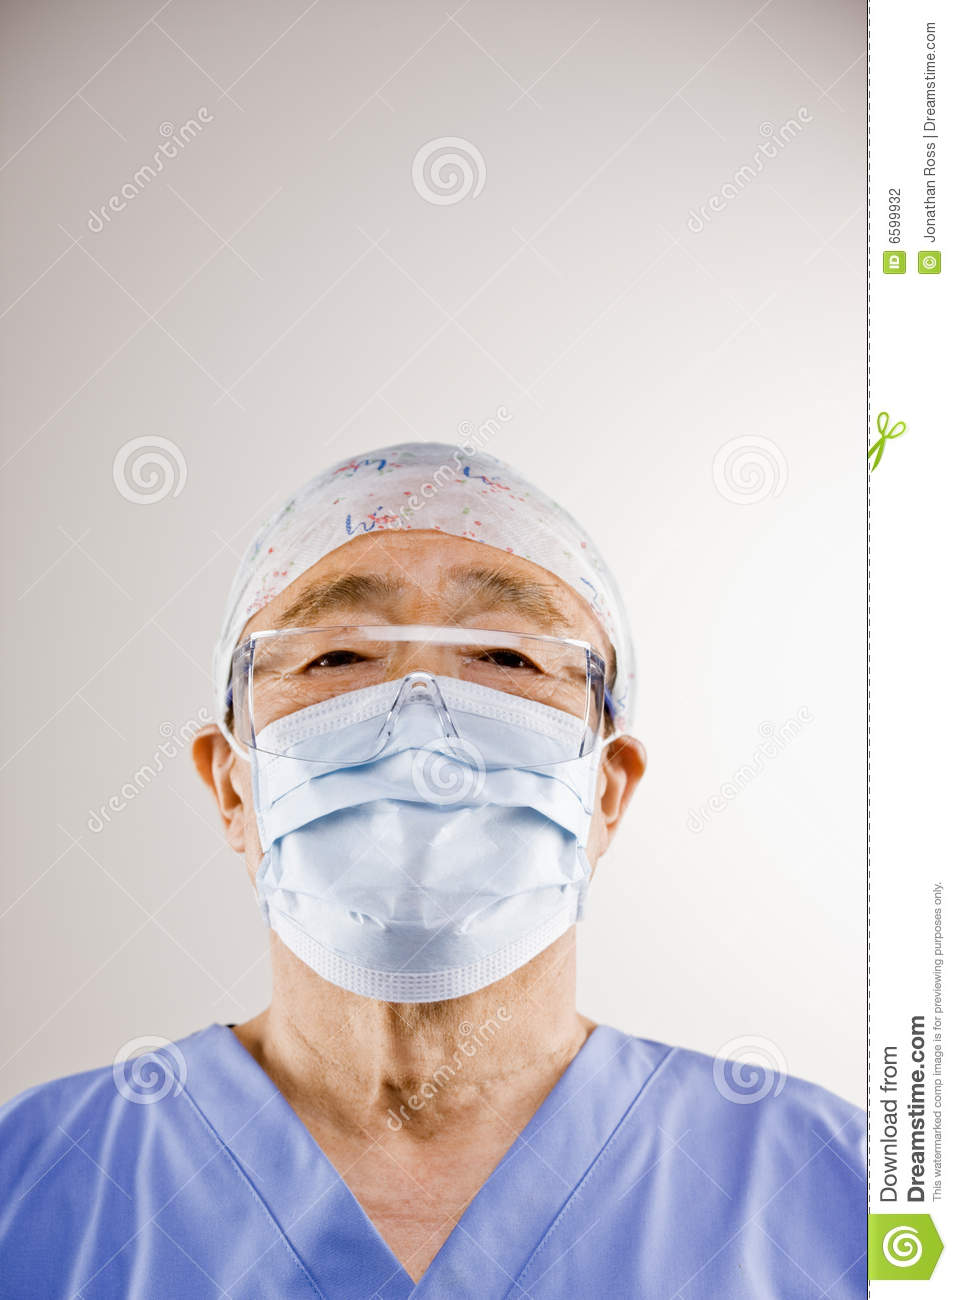 Doctor In Sterile Scrubs Surgical Mask Surgical Cap And Safety